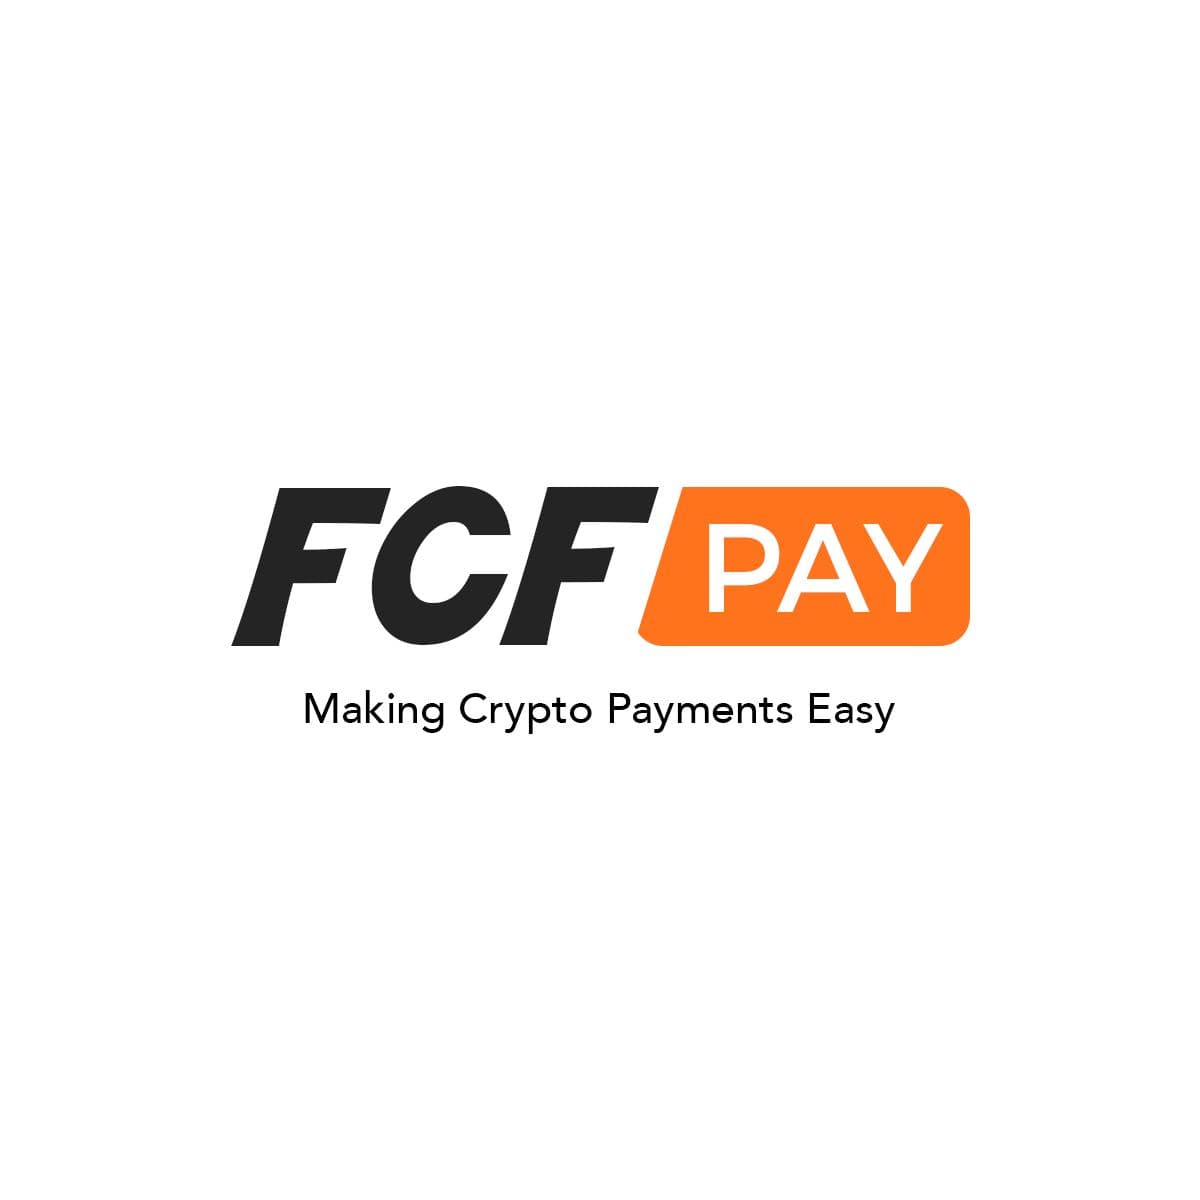 French Connection Finance launches an innovative payment gateway